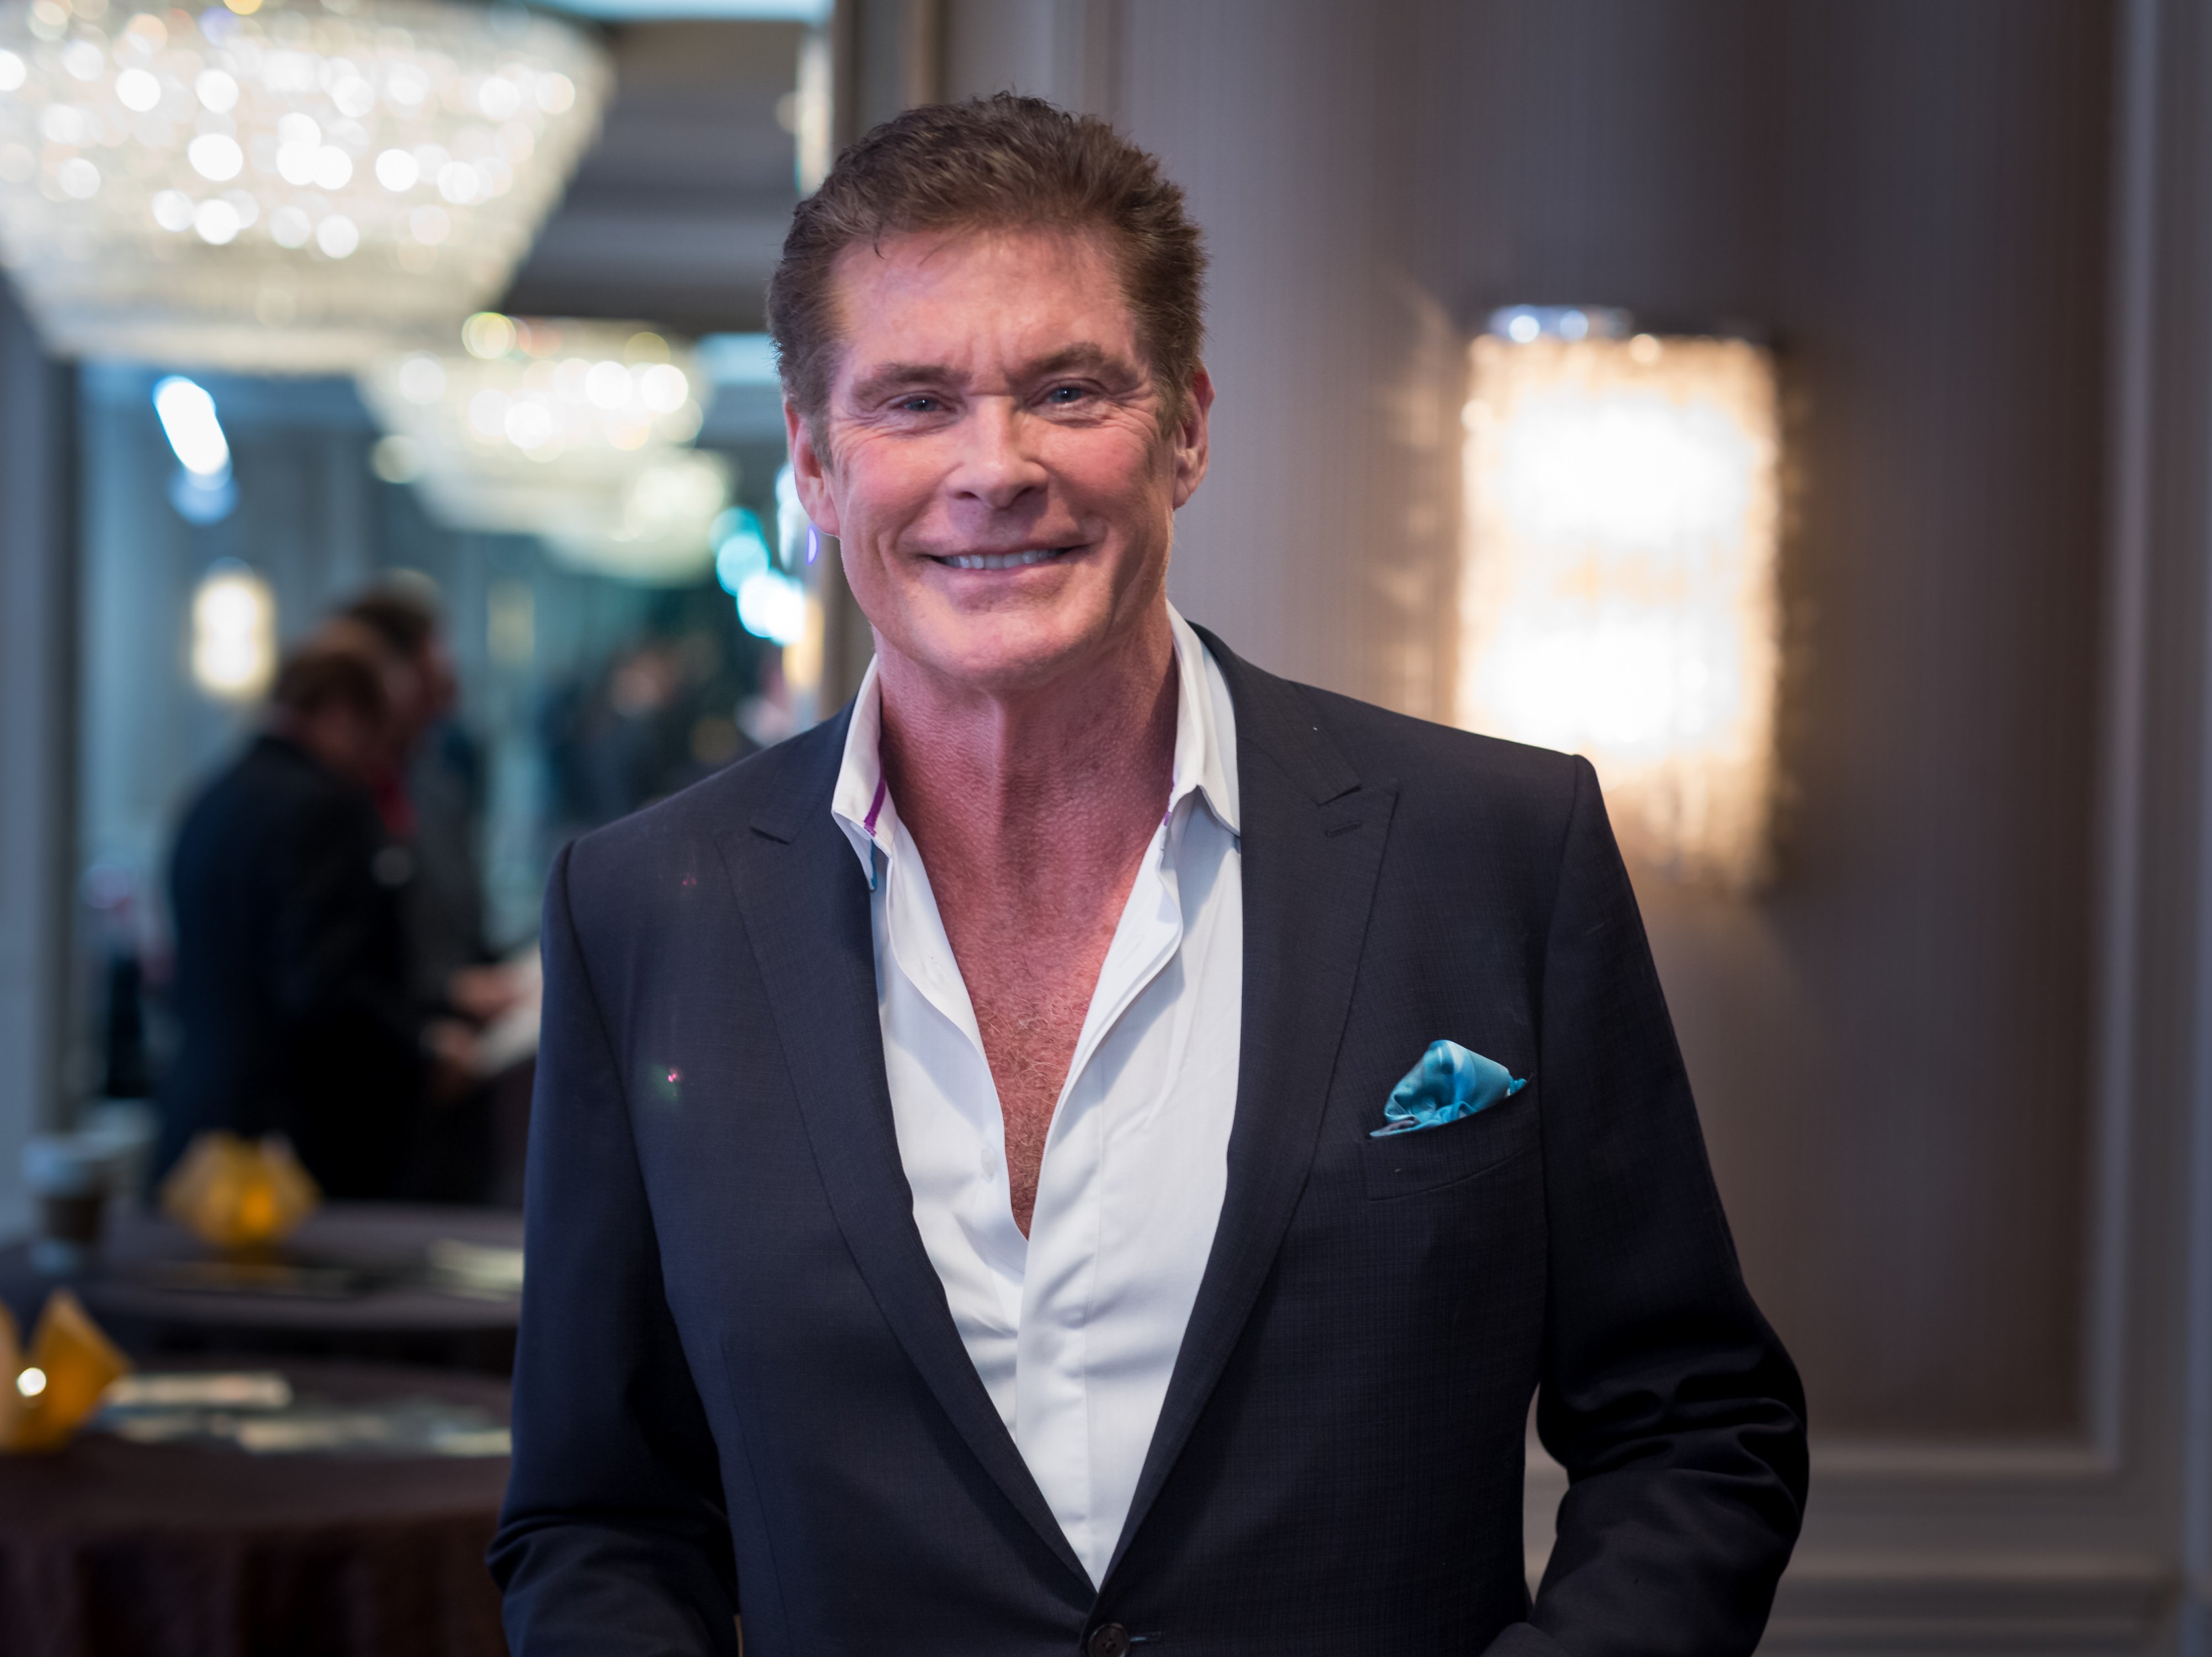 David Hasselhoff attends The Newsmaker Luncheon Series: A Moment In Time: Must See TV at the Beverly Wilshire Four Seasons Hotel on February 7, 2017, in Beverly Hills, California. | Source: Getty Images.